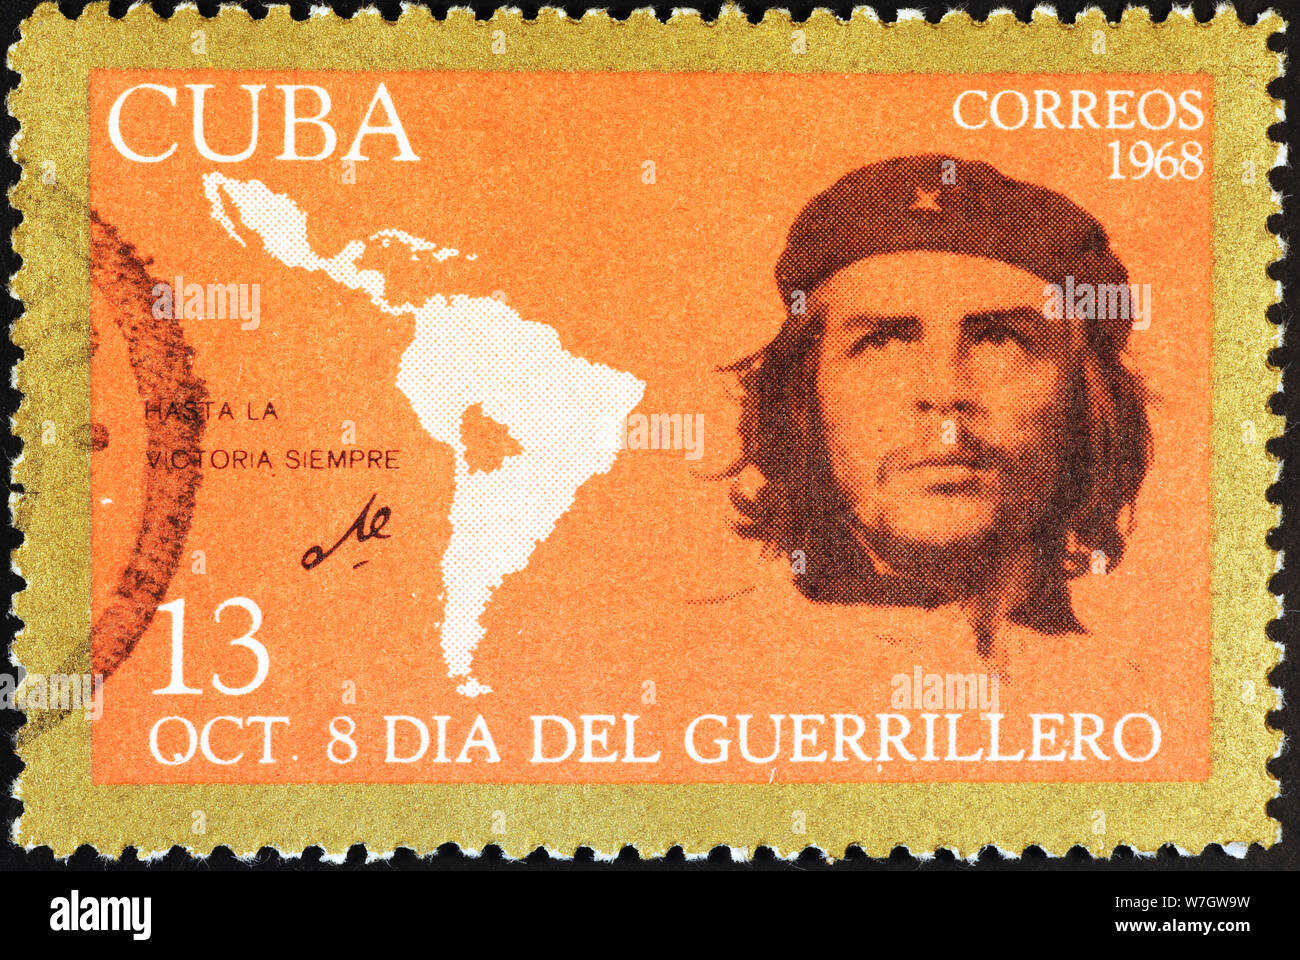 General Che Guevara on cuban postage stamp Stock Photo